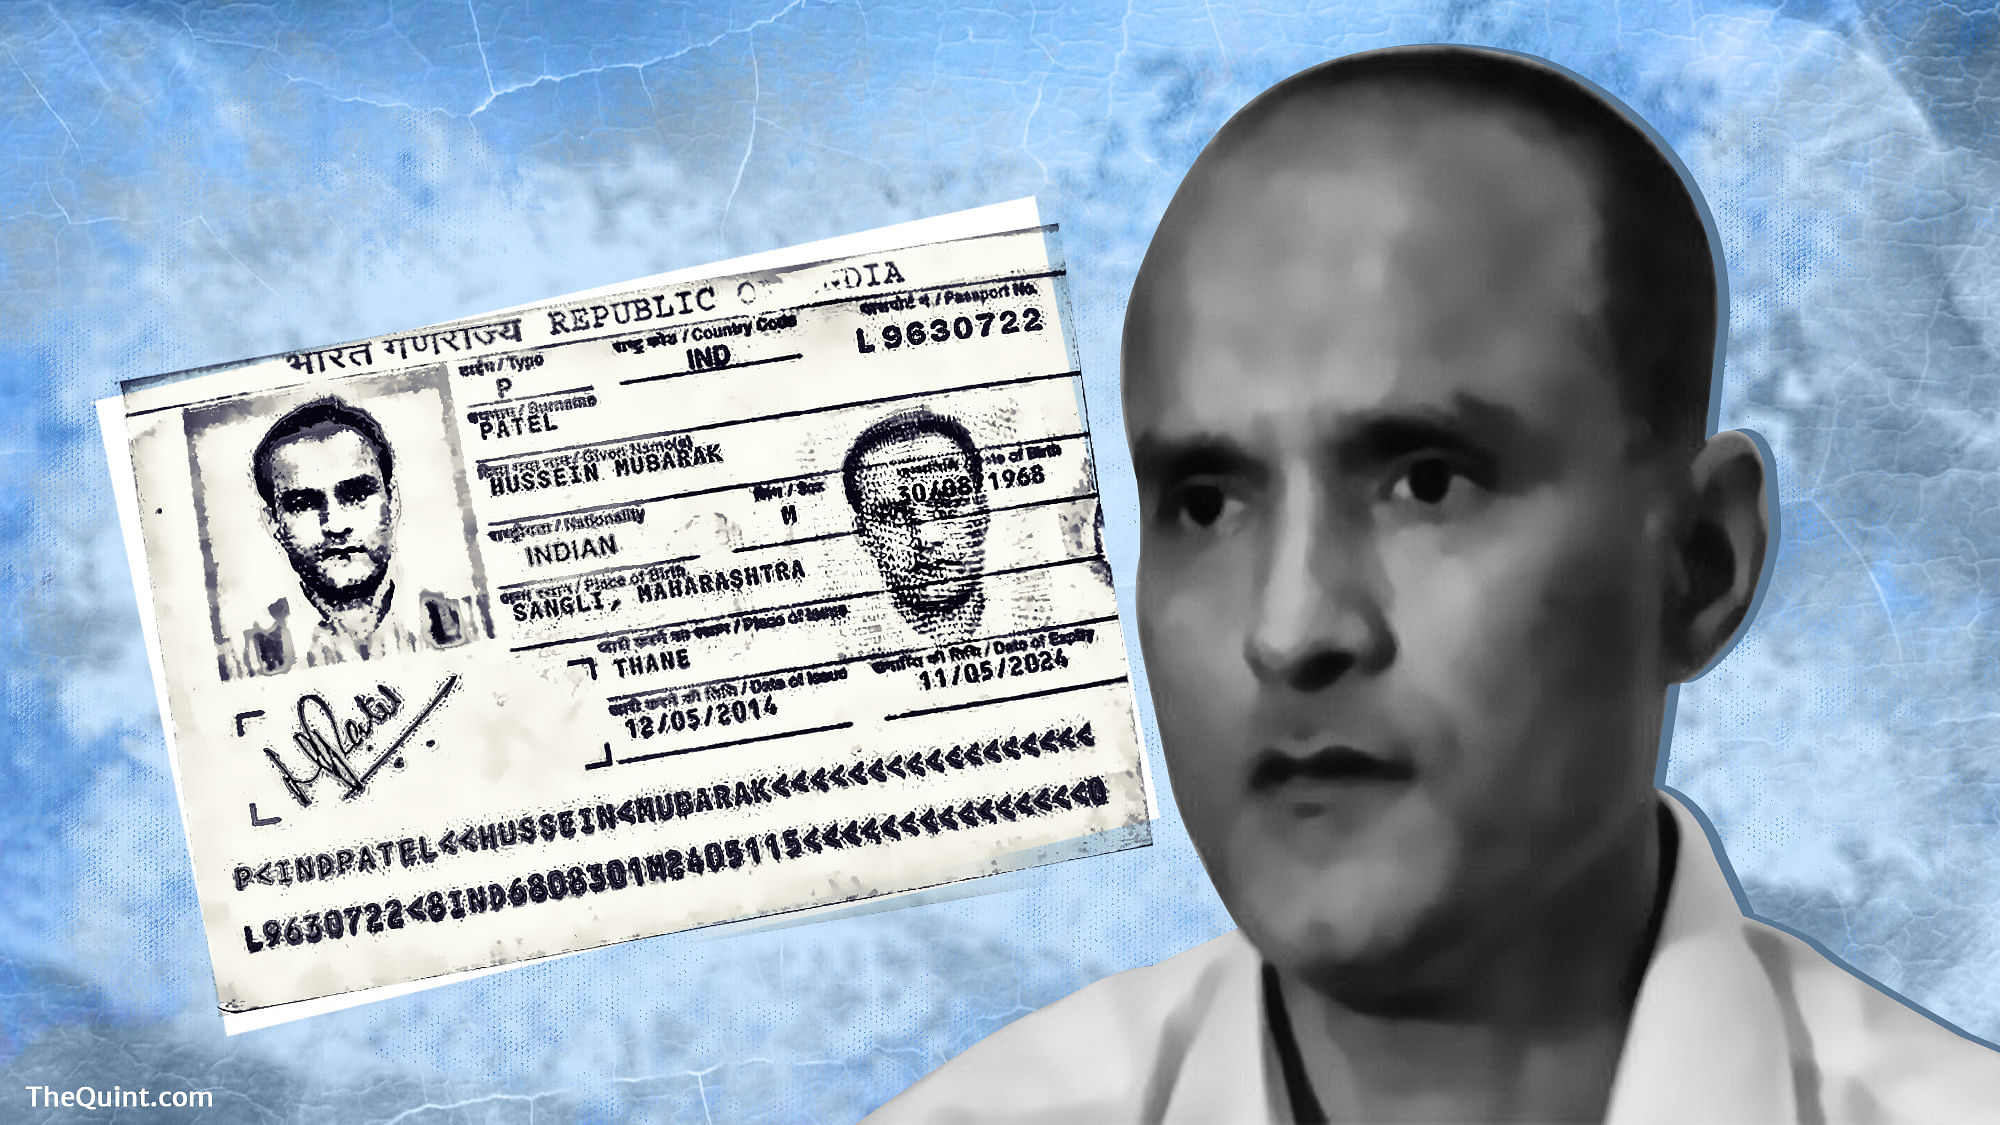 Kulbhushan Jadhav, who Islamabad claims is an Indian spy, had been sentenced to death by a Pakistani military court.